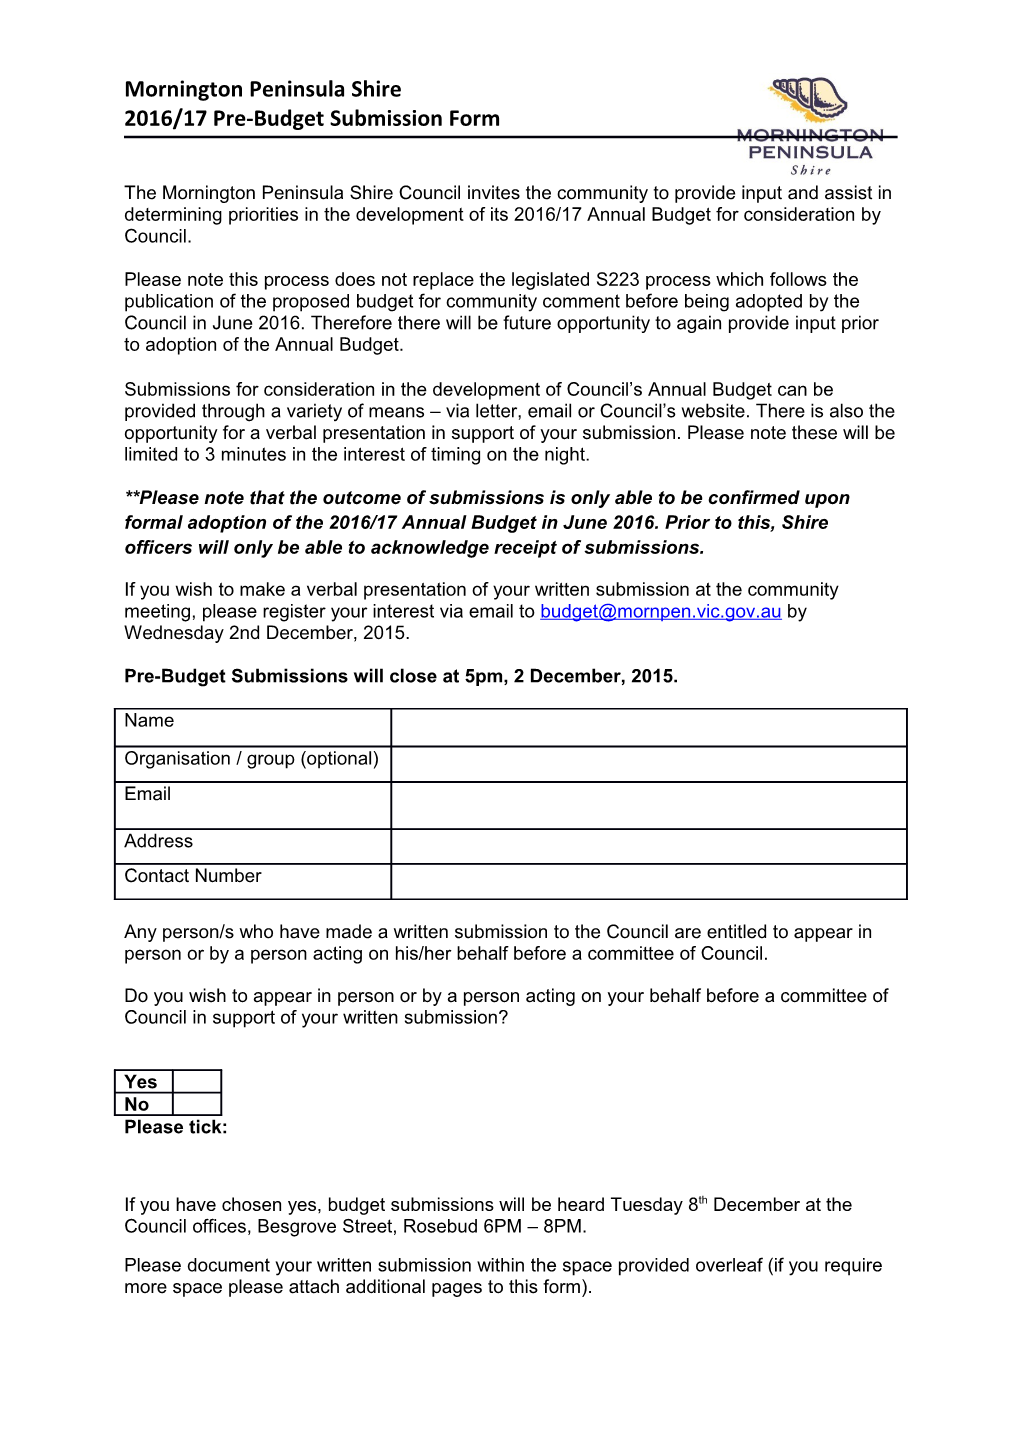 2016/17 Pre-Budget Submission Form